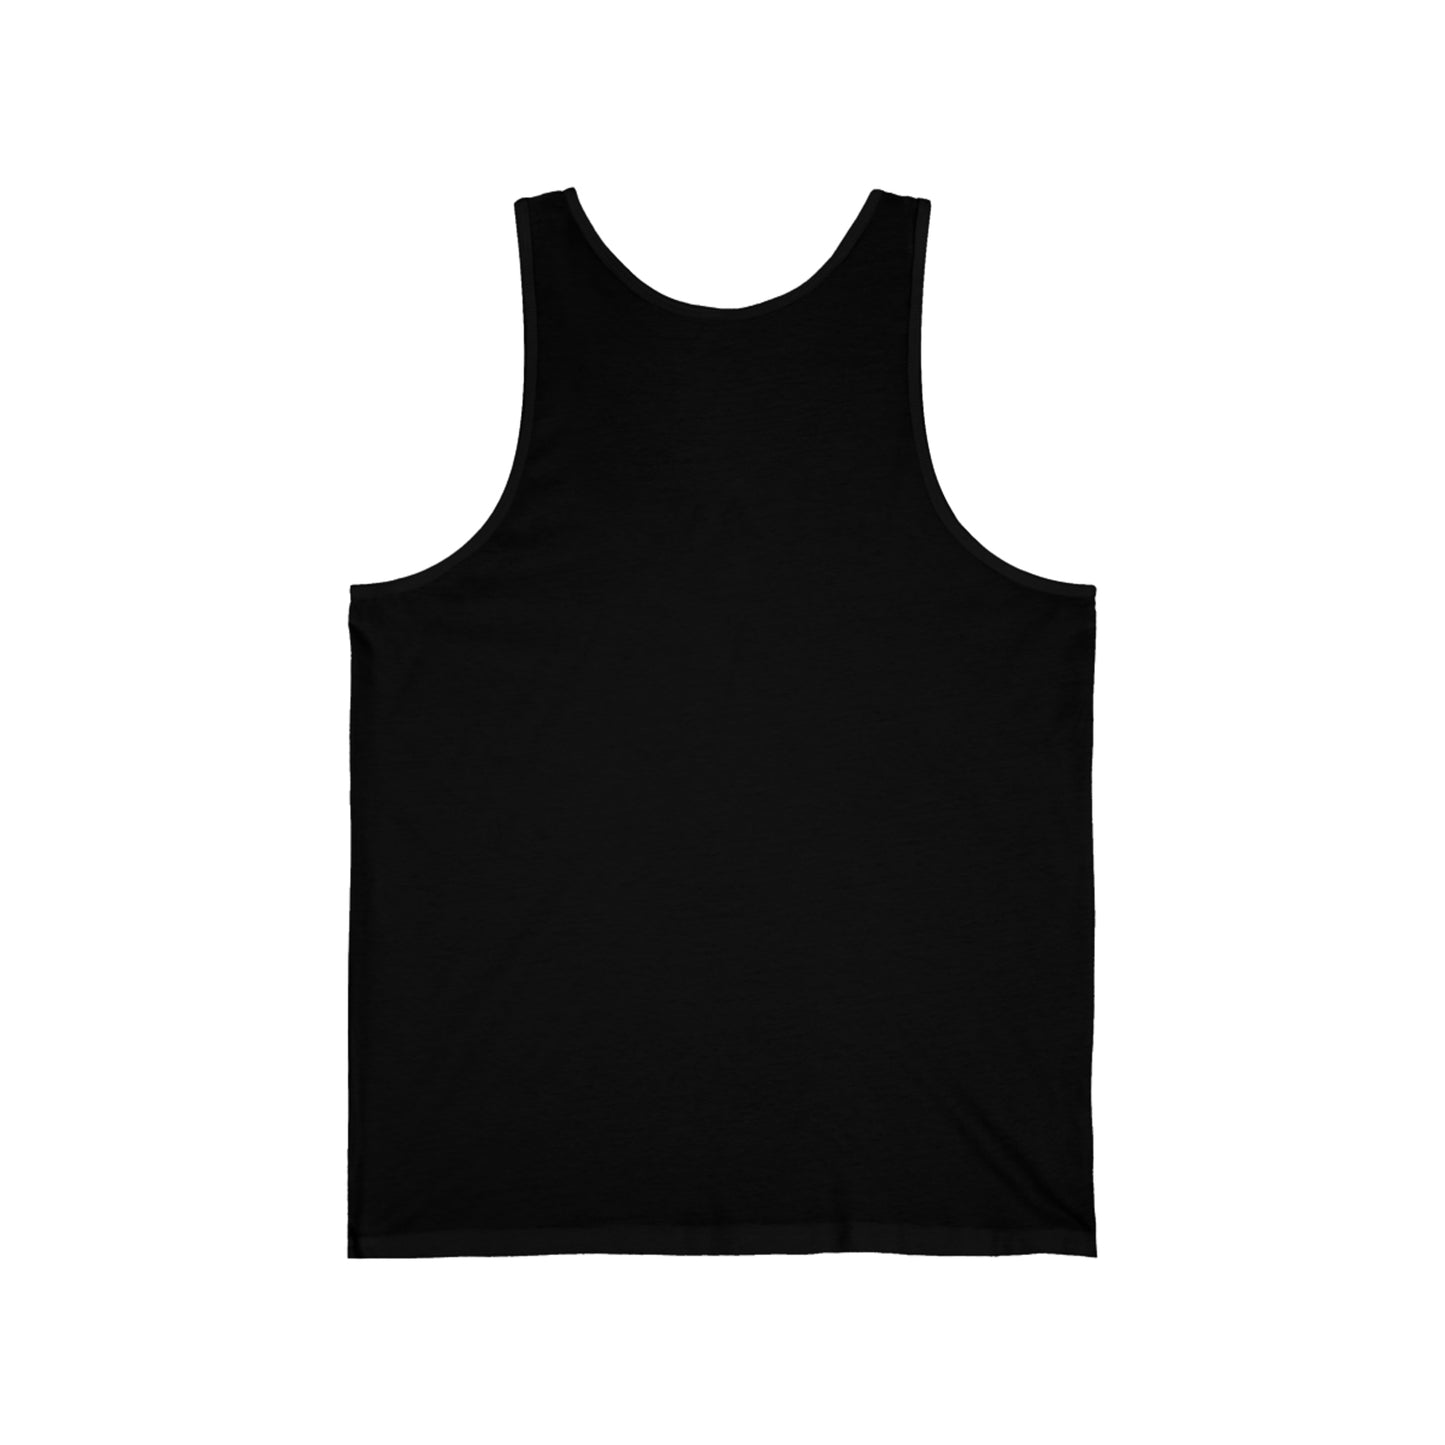 Mexican Roots Design 3: Tank Top